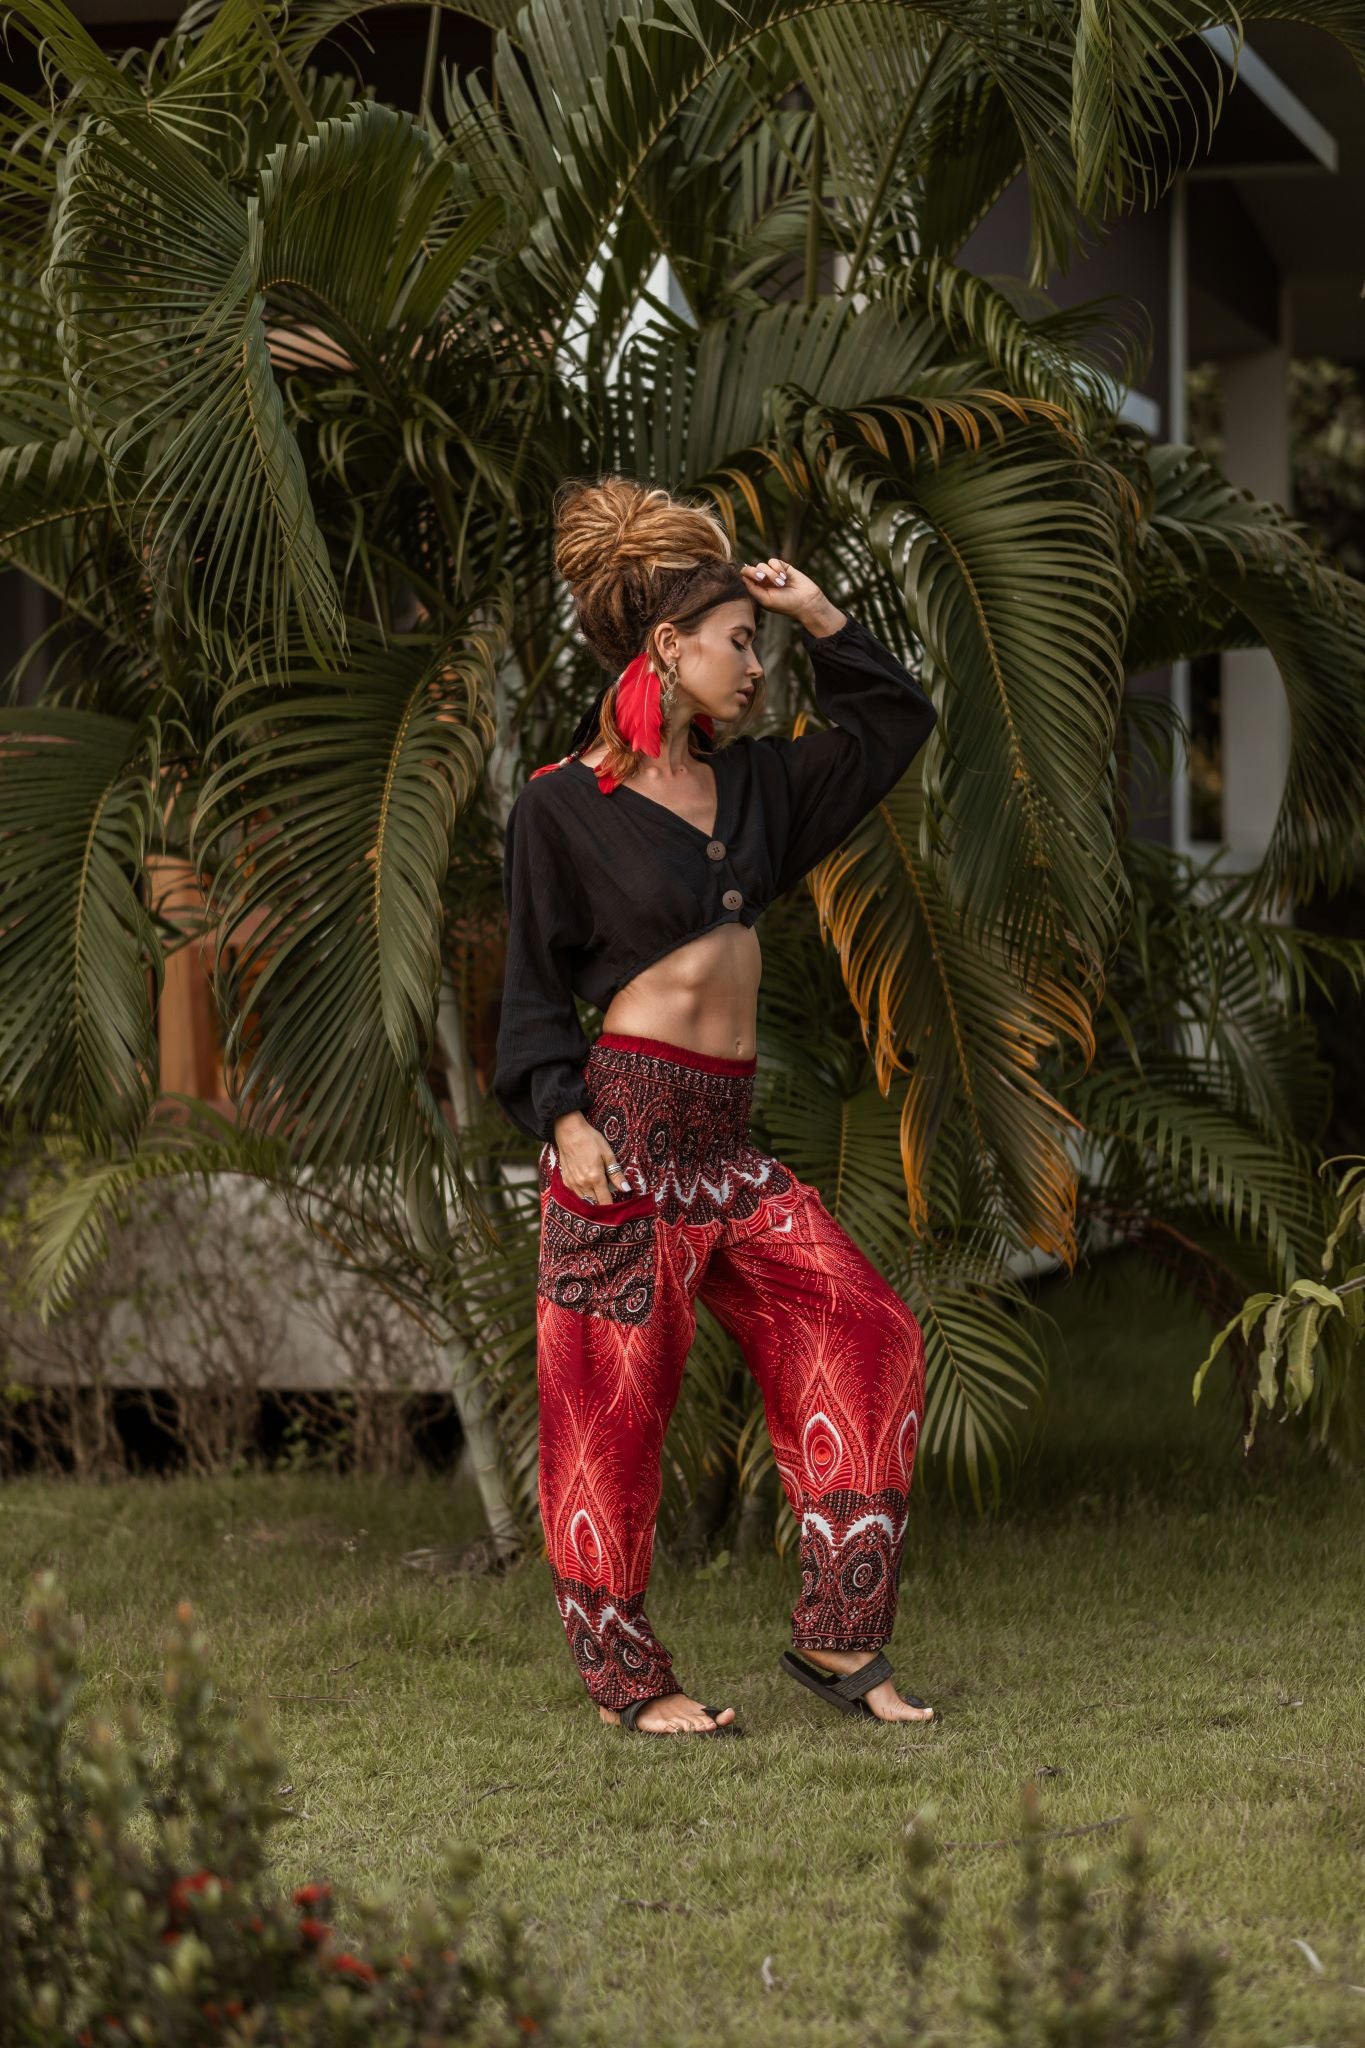 High Crotch Harem Pants - Vibrant Peacock Feather Print - Red